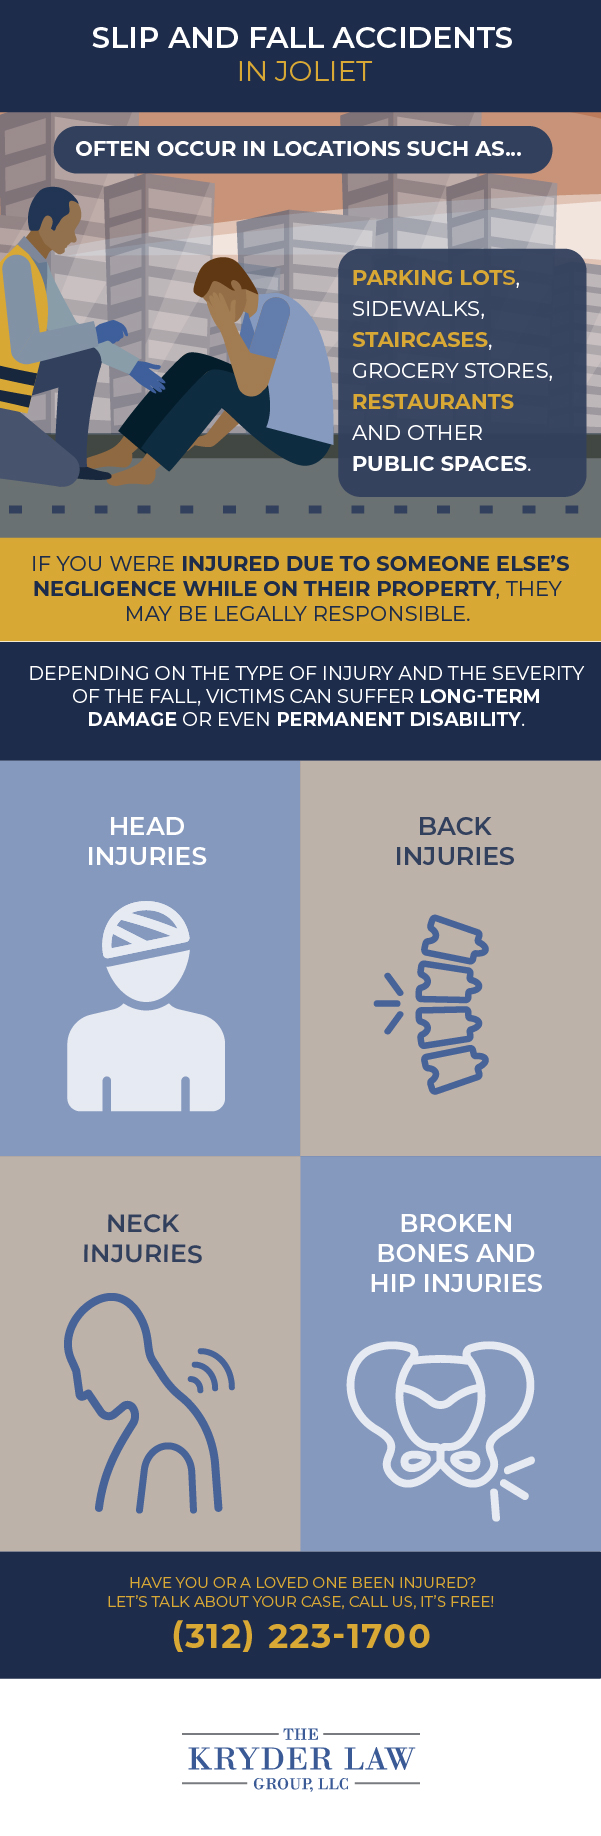 Joliet Slip and Fall Injury Lawyer Infographic